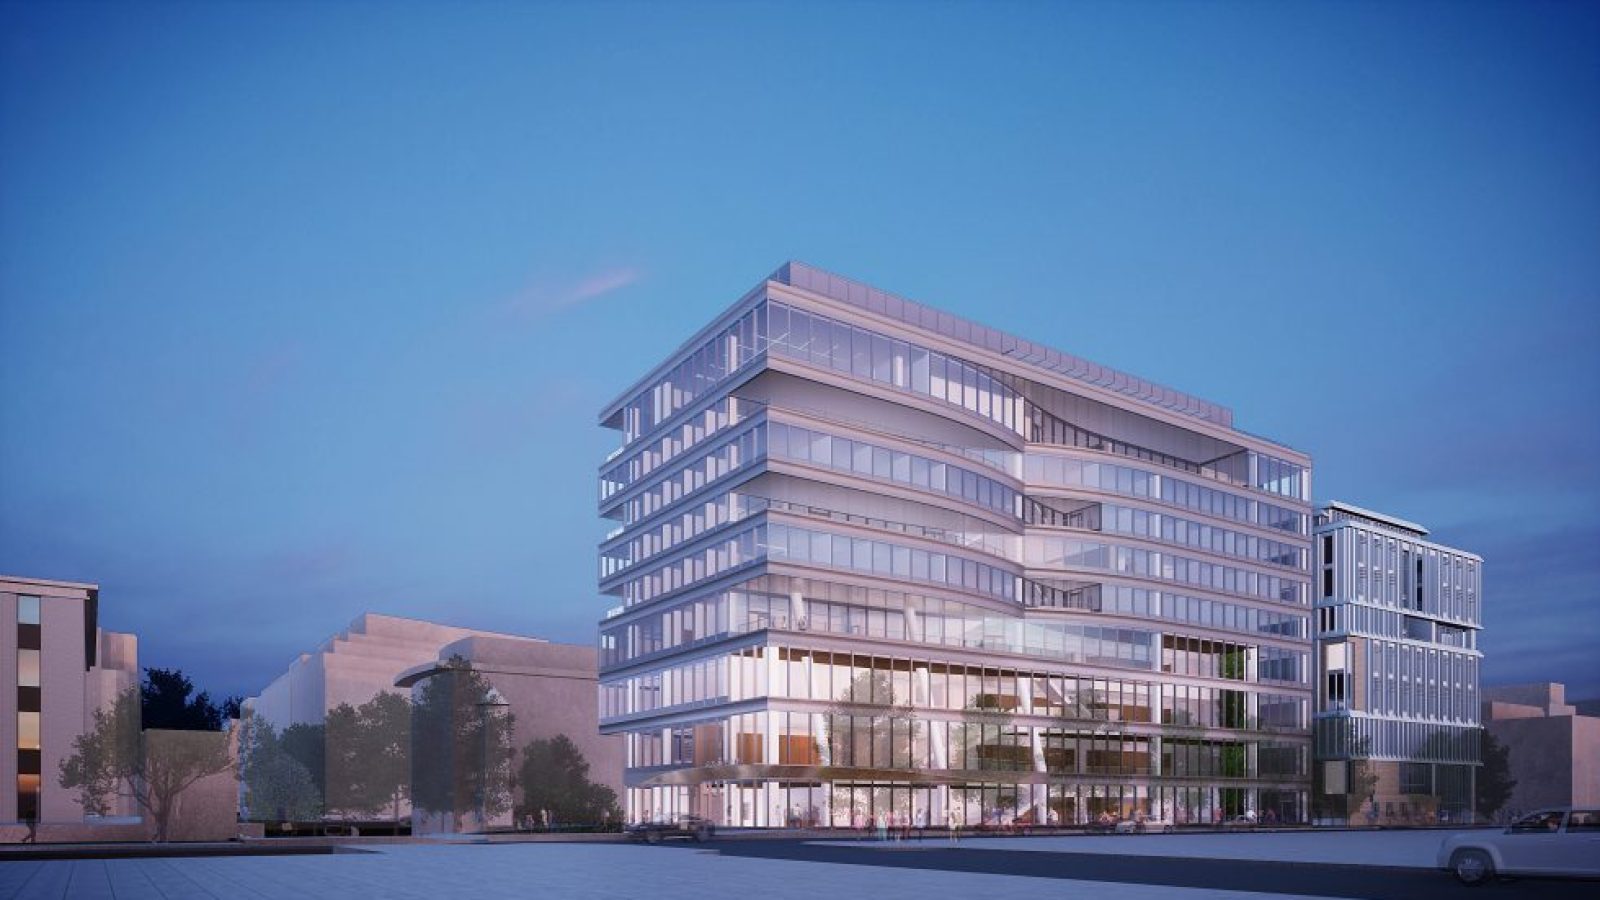 A rendering of the new 200,000-square-foot, state-of-the art academic building on the Georgetown Law campus and a new architectural landmark for Washington, D.C.&#039;s Capitol Hill neighborhood that an alumnus has donated funds for.